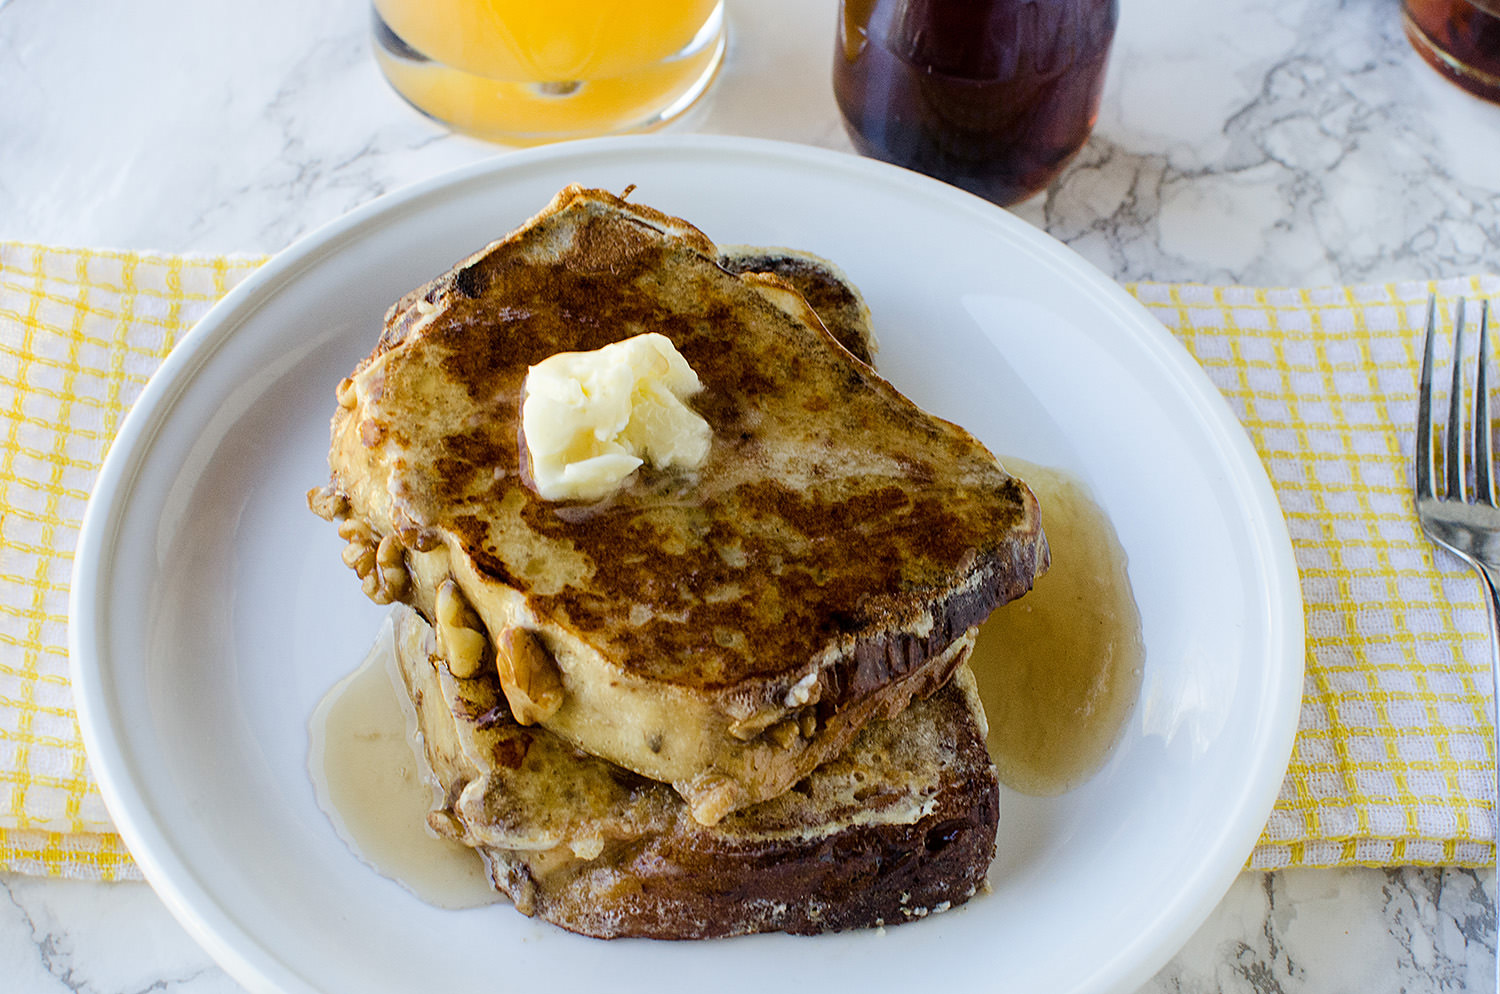 Breakfast about the only thing your kids will eat? Yup, us too. Lifestyle blogger Carly from Lipgloss & Crayons shares this banana bread french toast is delicious at any time of day!